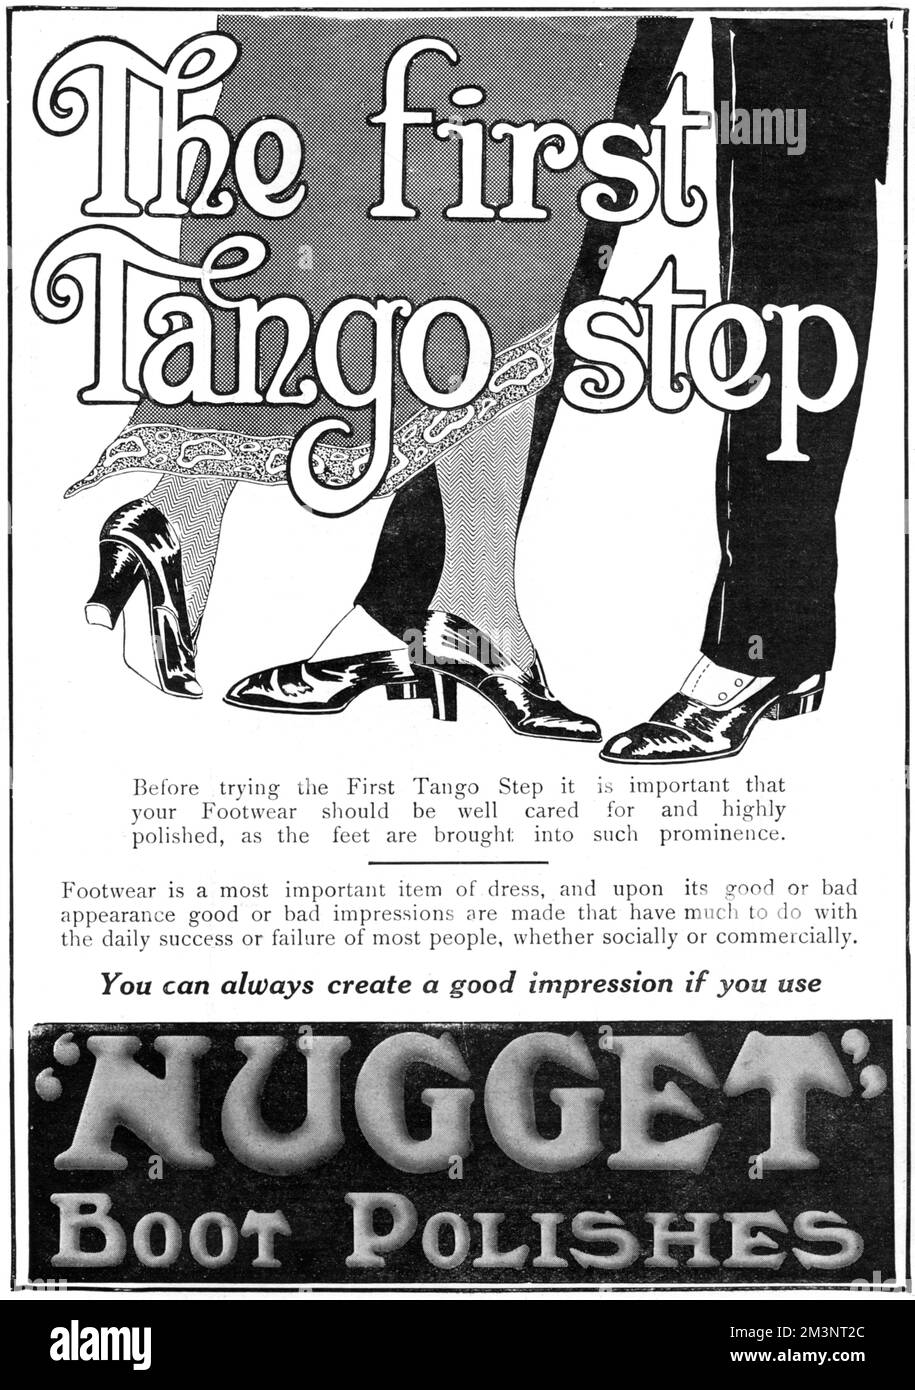 Create a good impression when dancing your first tango step: use &quot;Nugget&quot; boot polish.     Date: 1913 Stock Photo